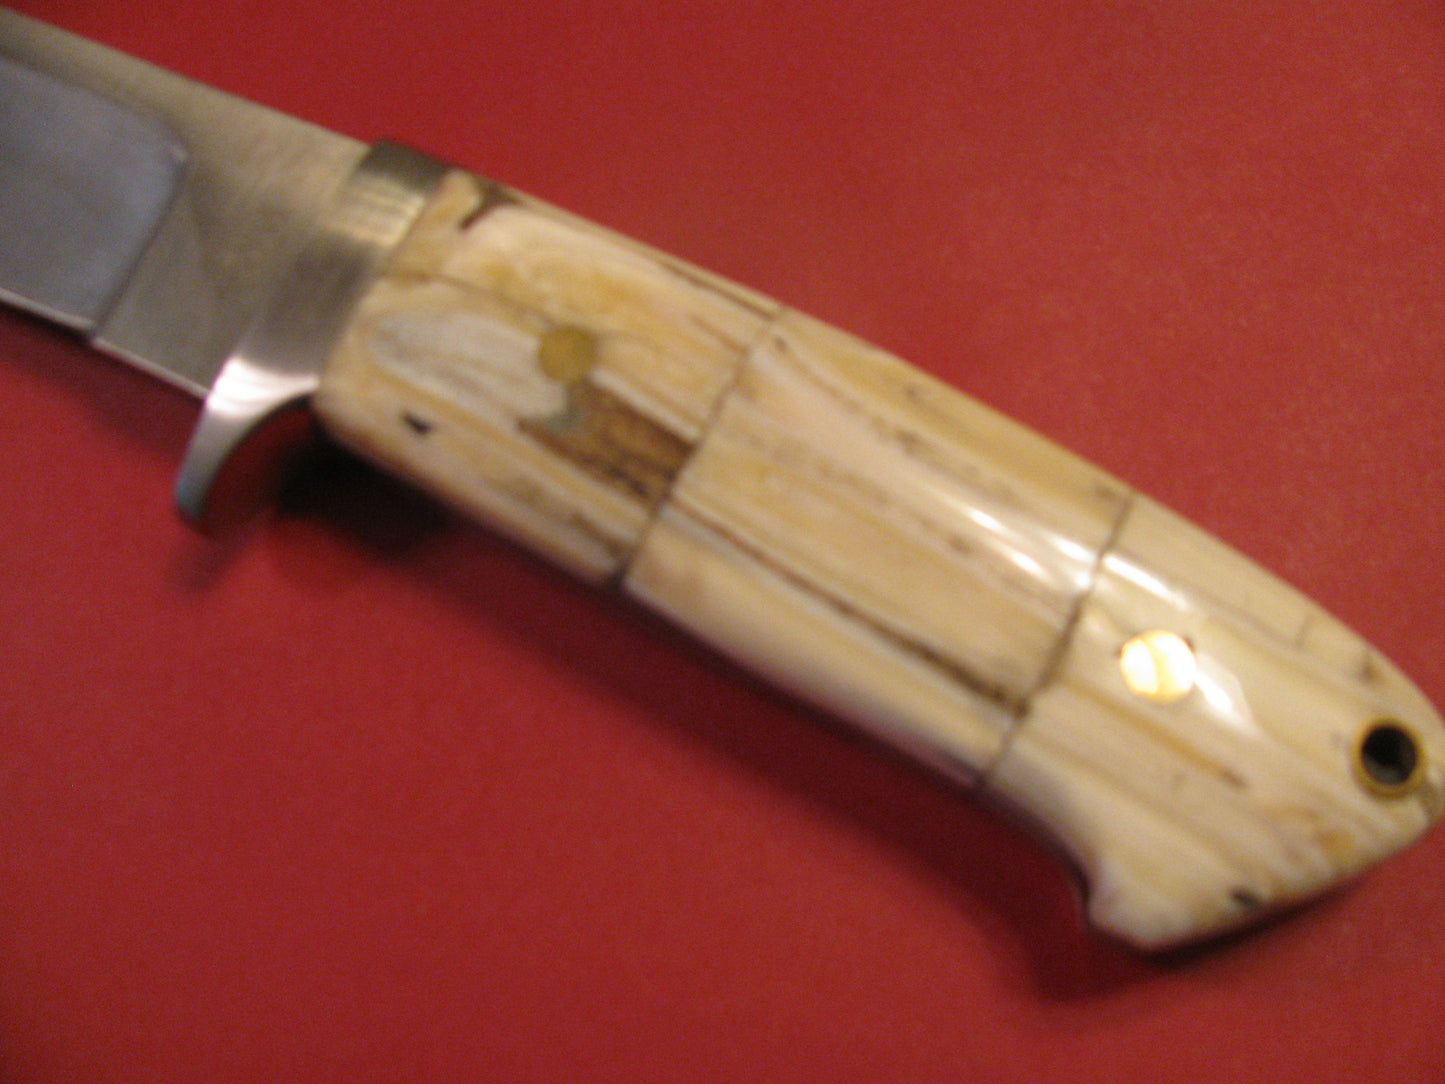 FX-075 Mammoth Fossil Handle  Knife